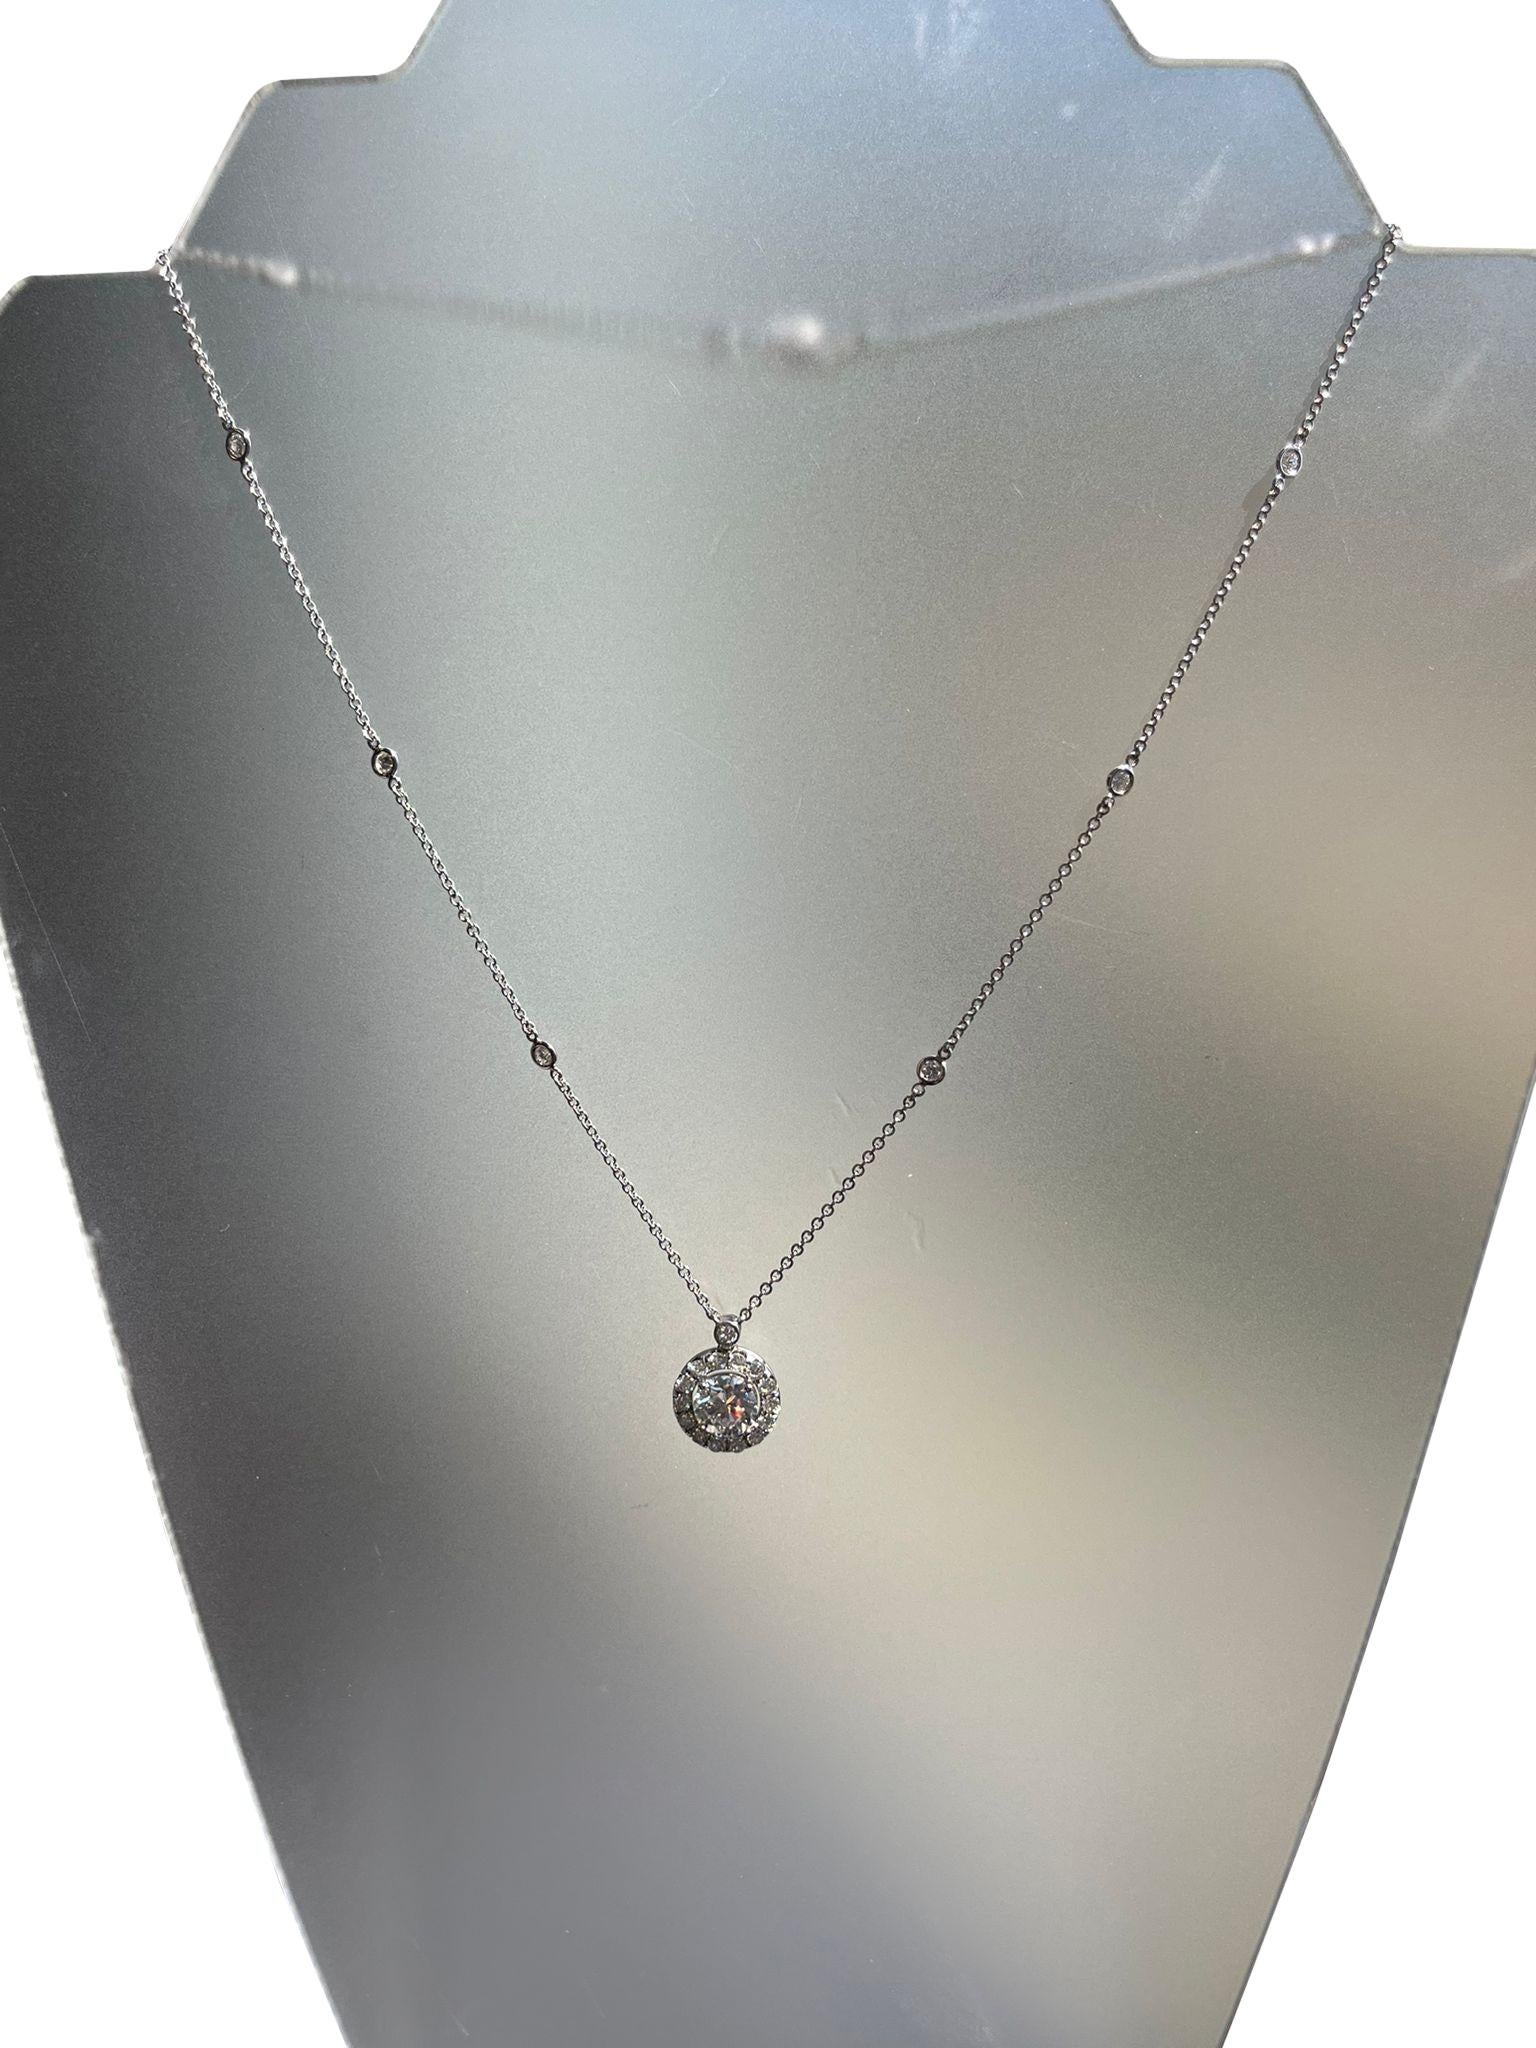 3.35ct Natural Round Diamond Halo Pendant Station Necklace in 14K White Gold For Sale 1